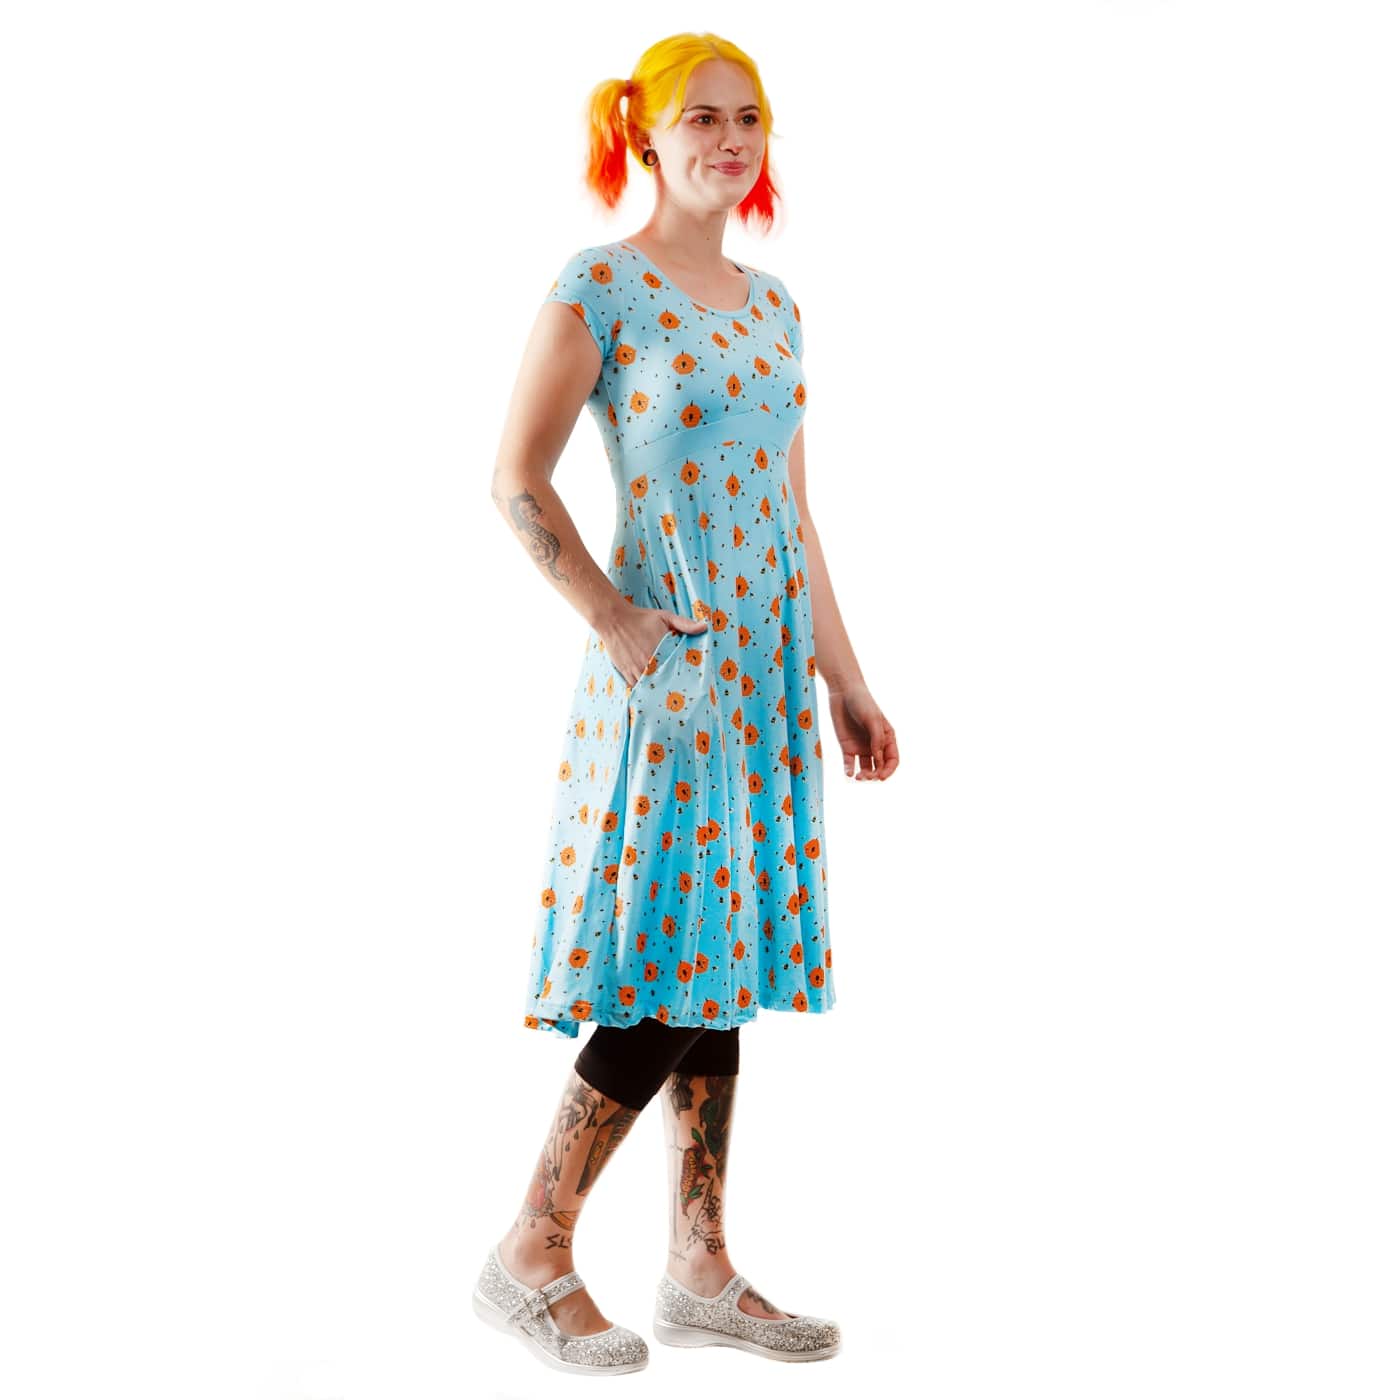 Hive Tea Dress by RainbowsAndFairies.com (Beehive - Bees - Bumblebee - Honey - Dress With Pockets - Rockabilly - Vintage Inspired - Rock & Roll) - SKU: CL_TEADR_BHIVE_ORG - Pic 06